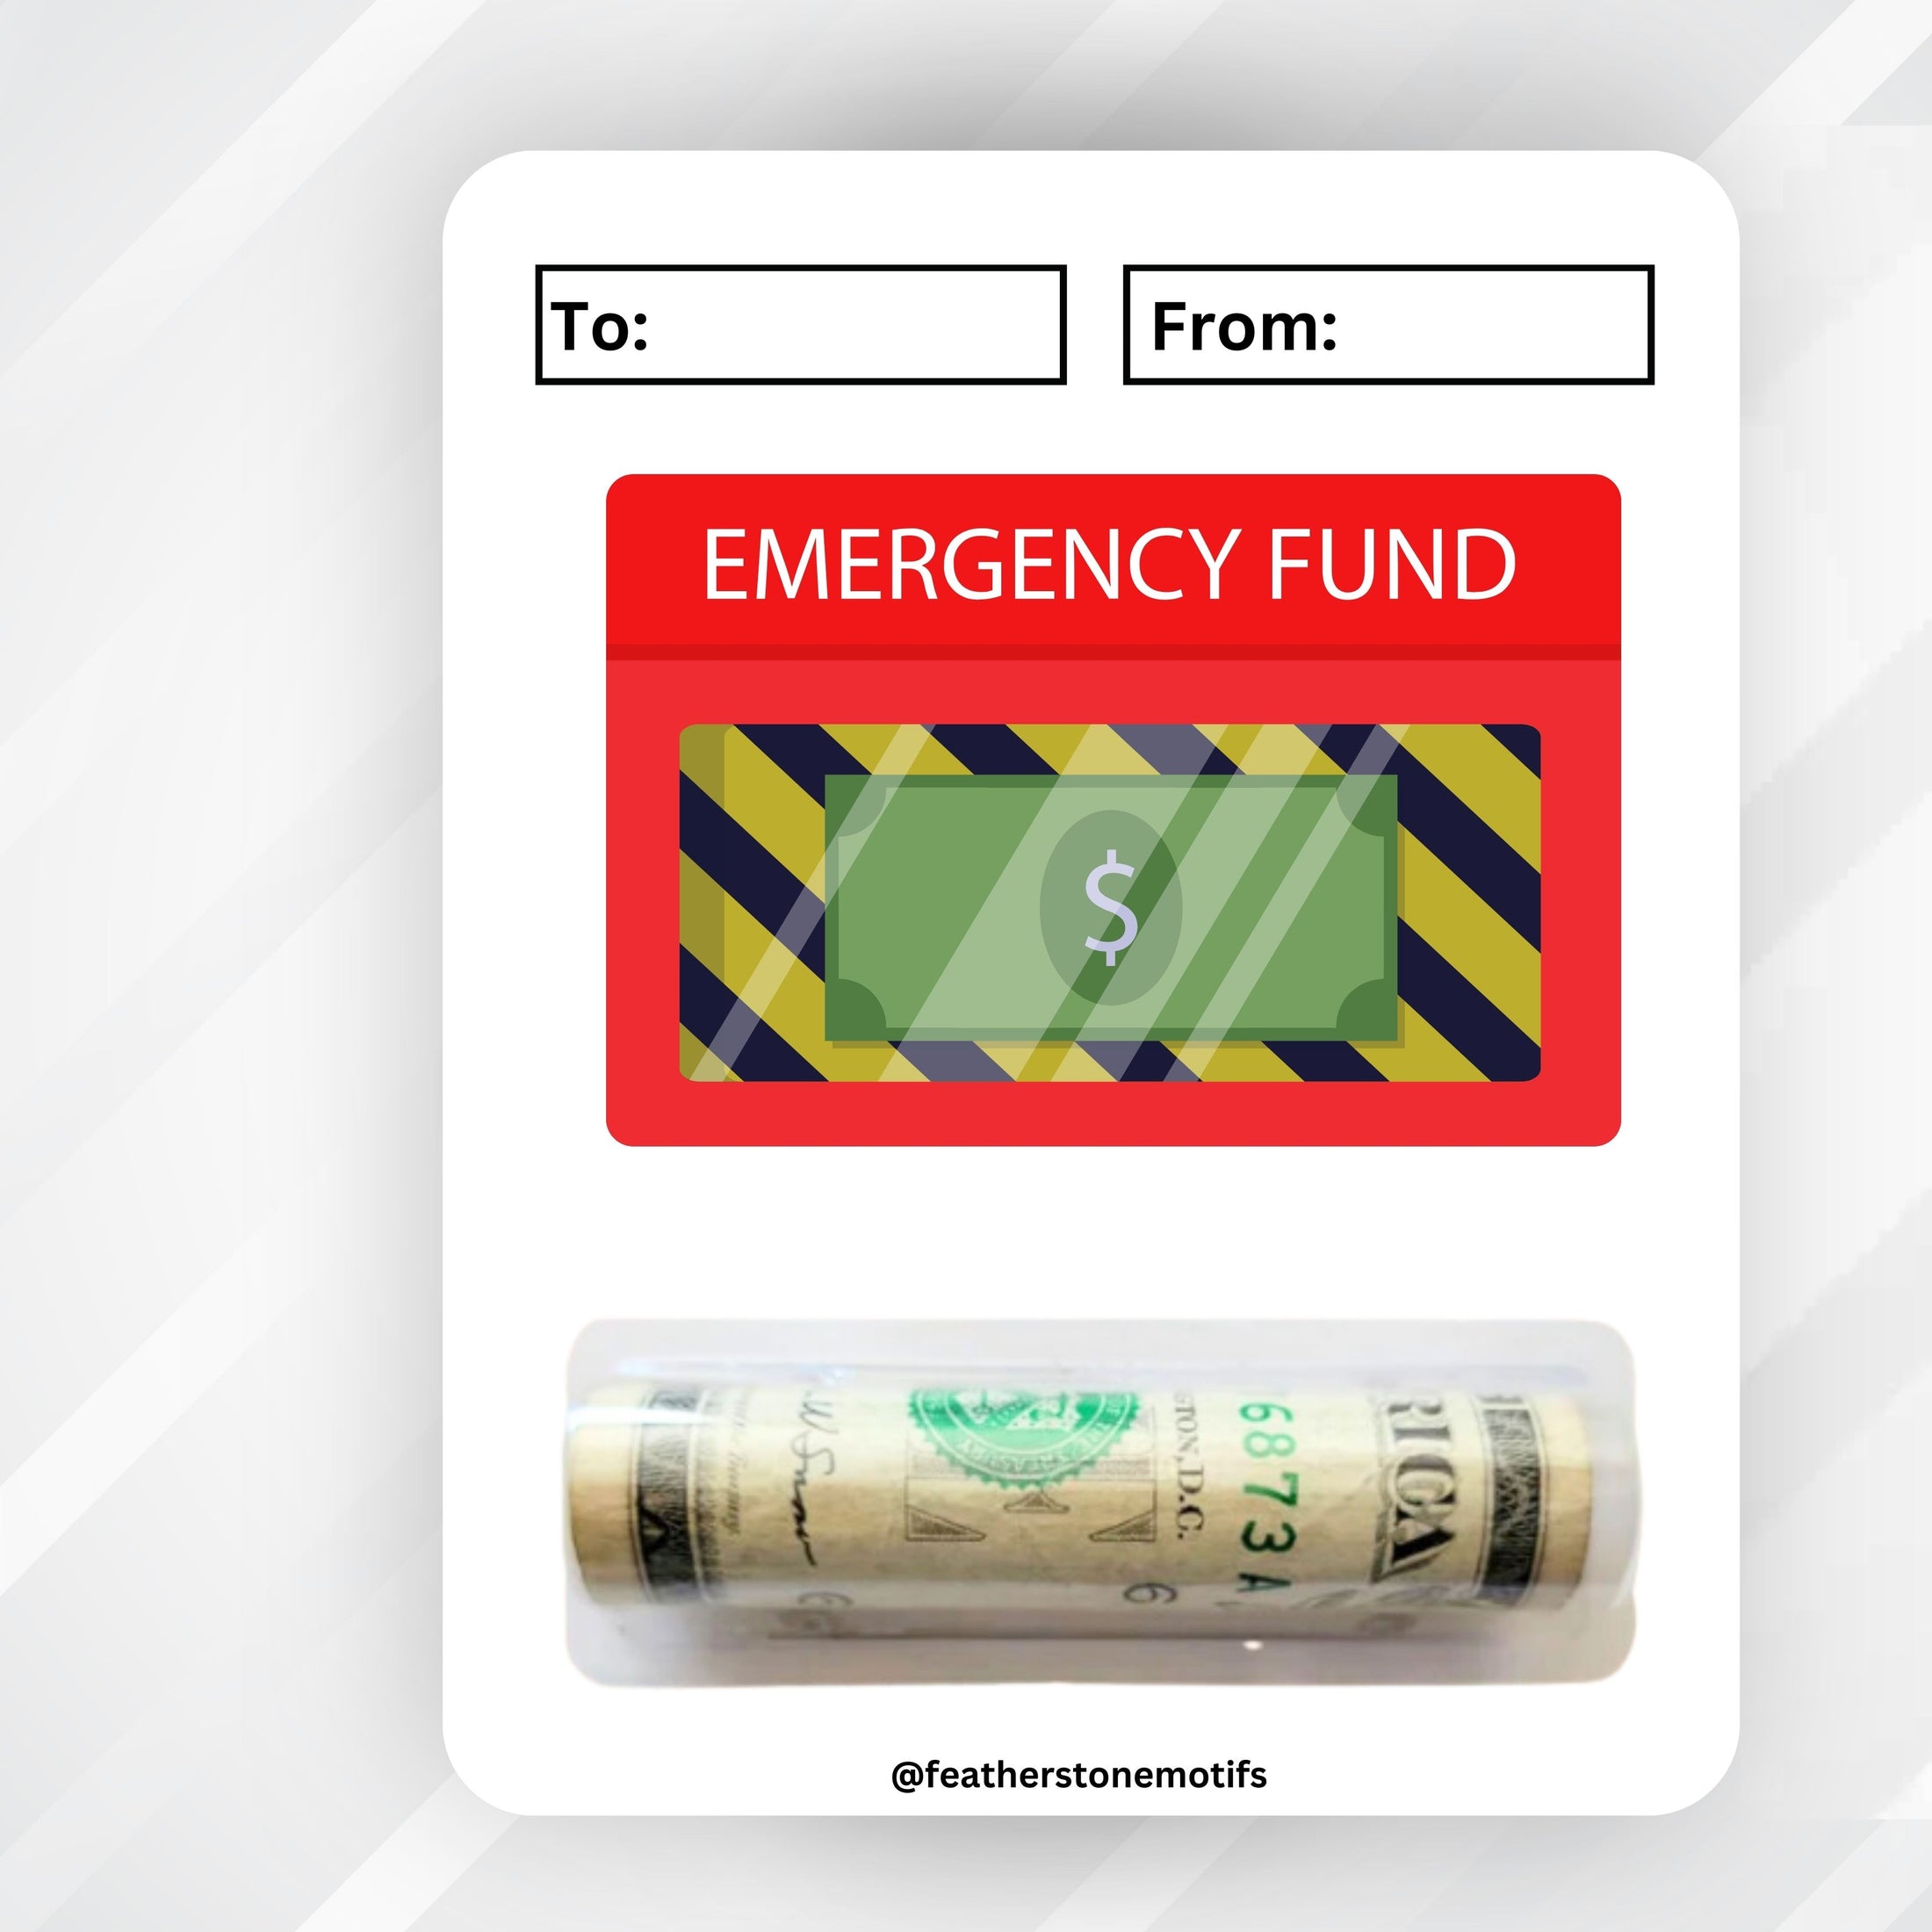 This image shows the money tube attached to the Emergency Funds money card.